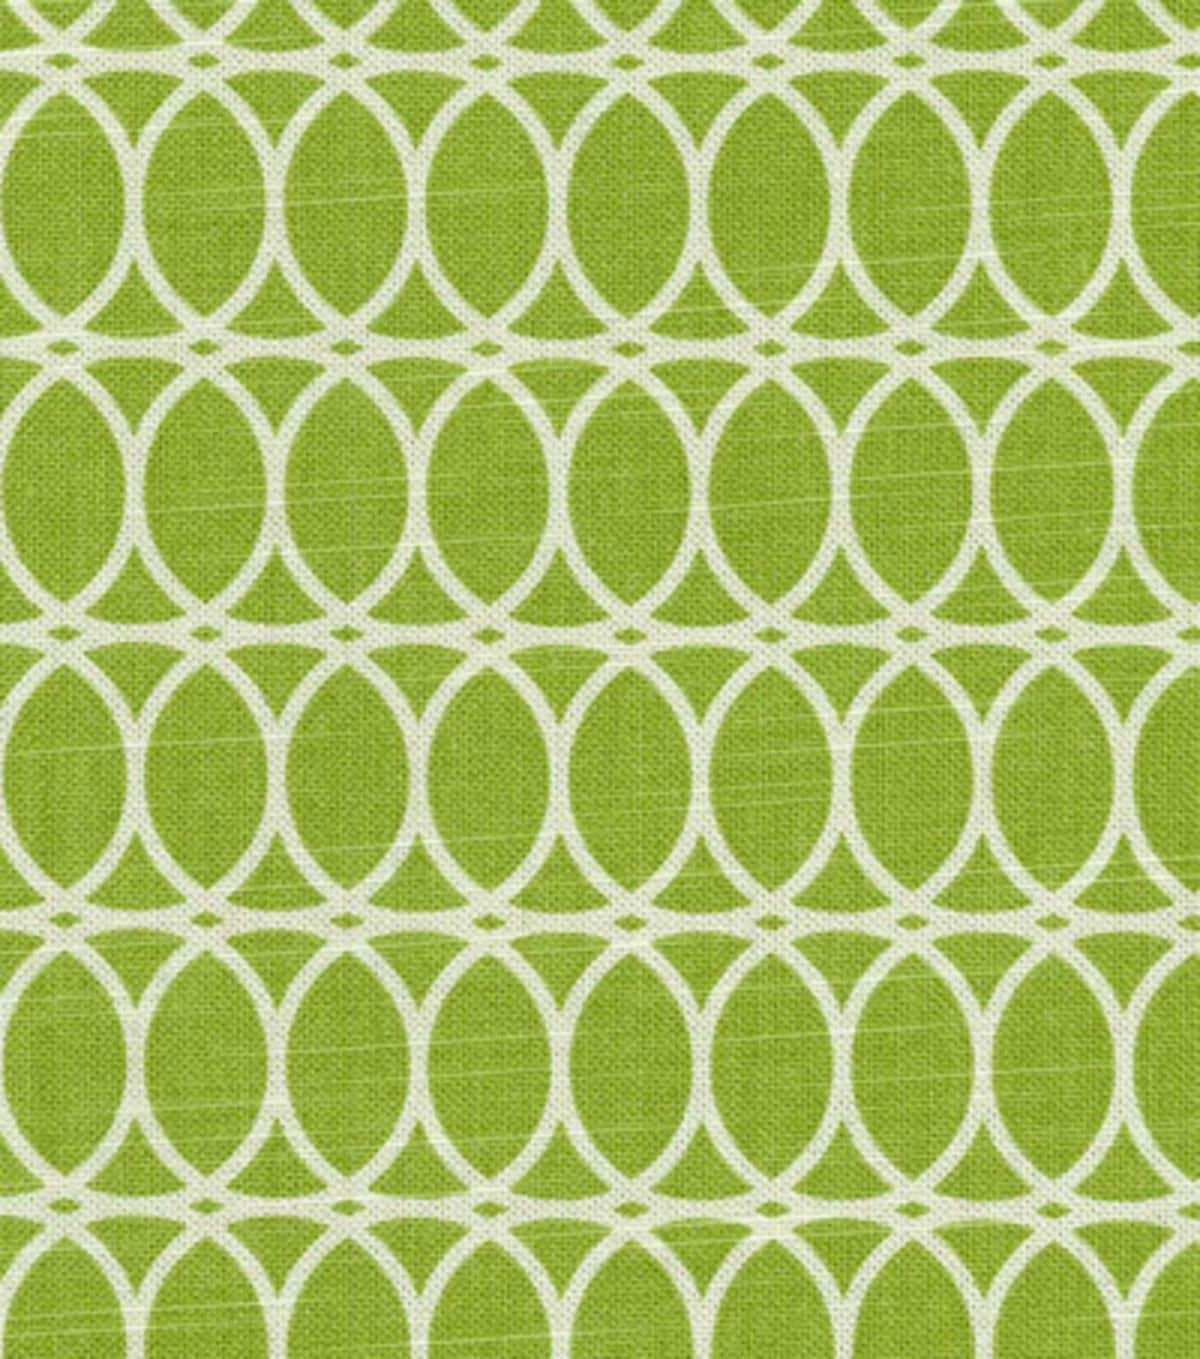 Straight Custom Valance in Green Citrine 100% cotton home decor fabric, fully lined kitchen valance